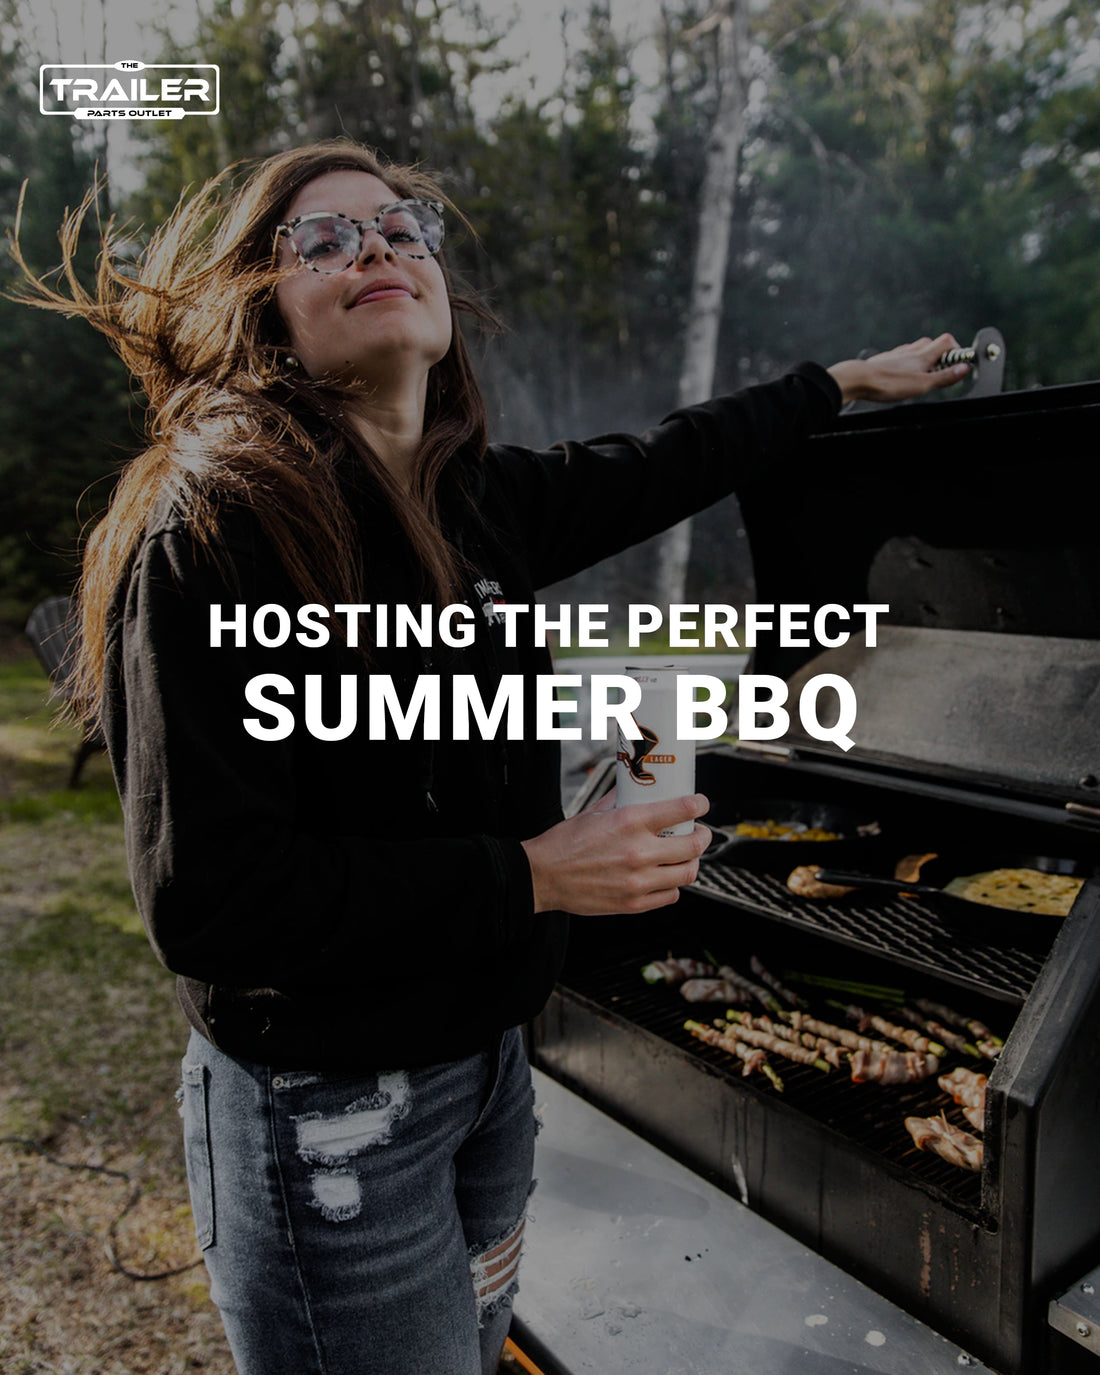 Hosting the Perfect Summer BBQ with Help from Your Trailer